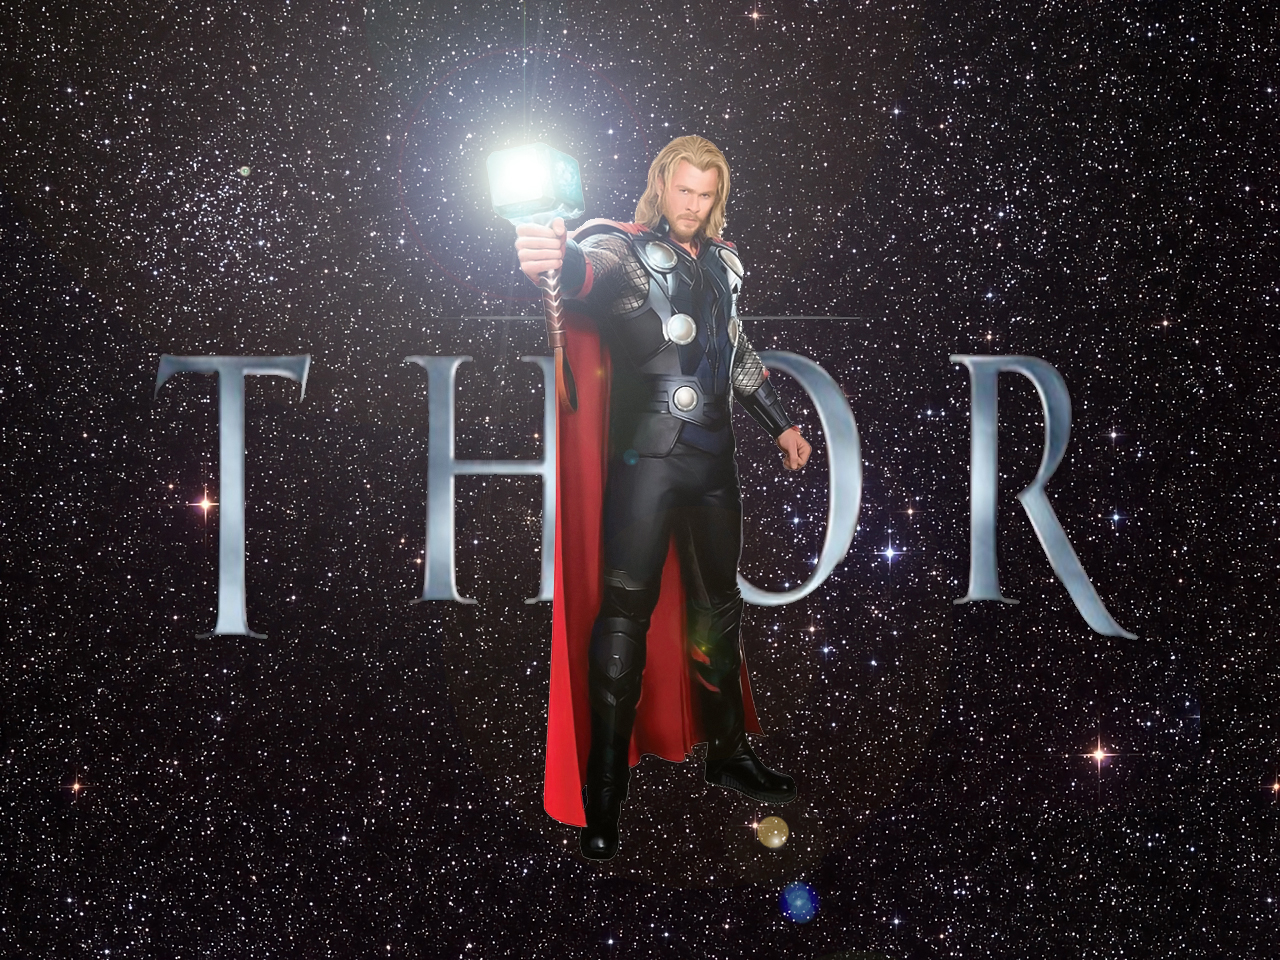 Mighty Thor Wallpaper Ic